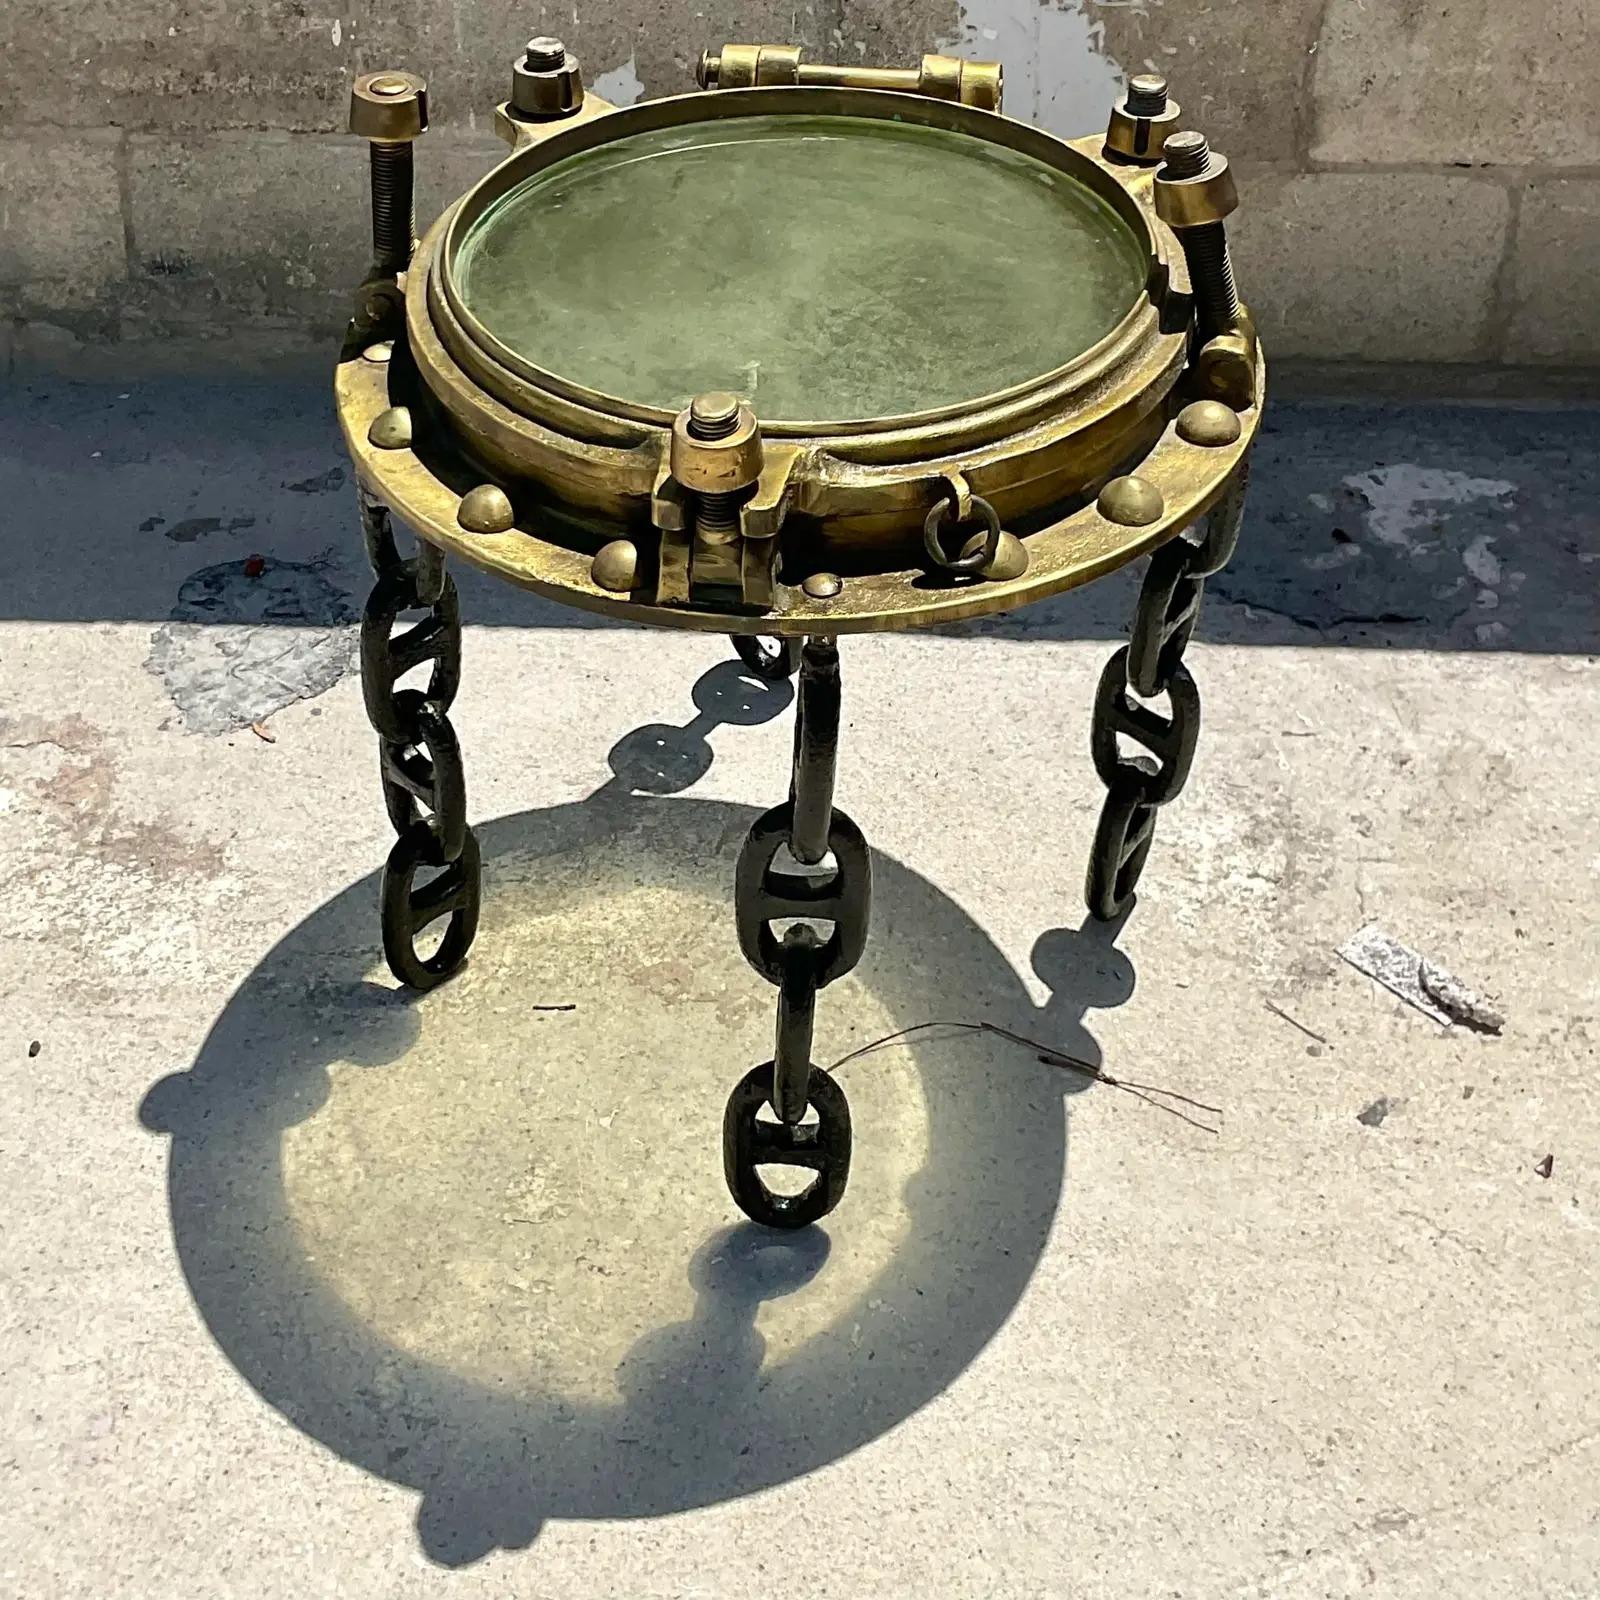 Amazing vintage Nautical side table. An original brass porthole with original glass. Supported by vintage ship chain link legs. A real collectors item. Acquired from a Palm Beach estate.